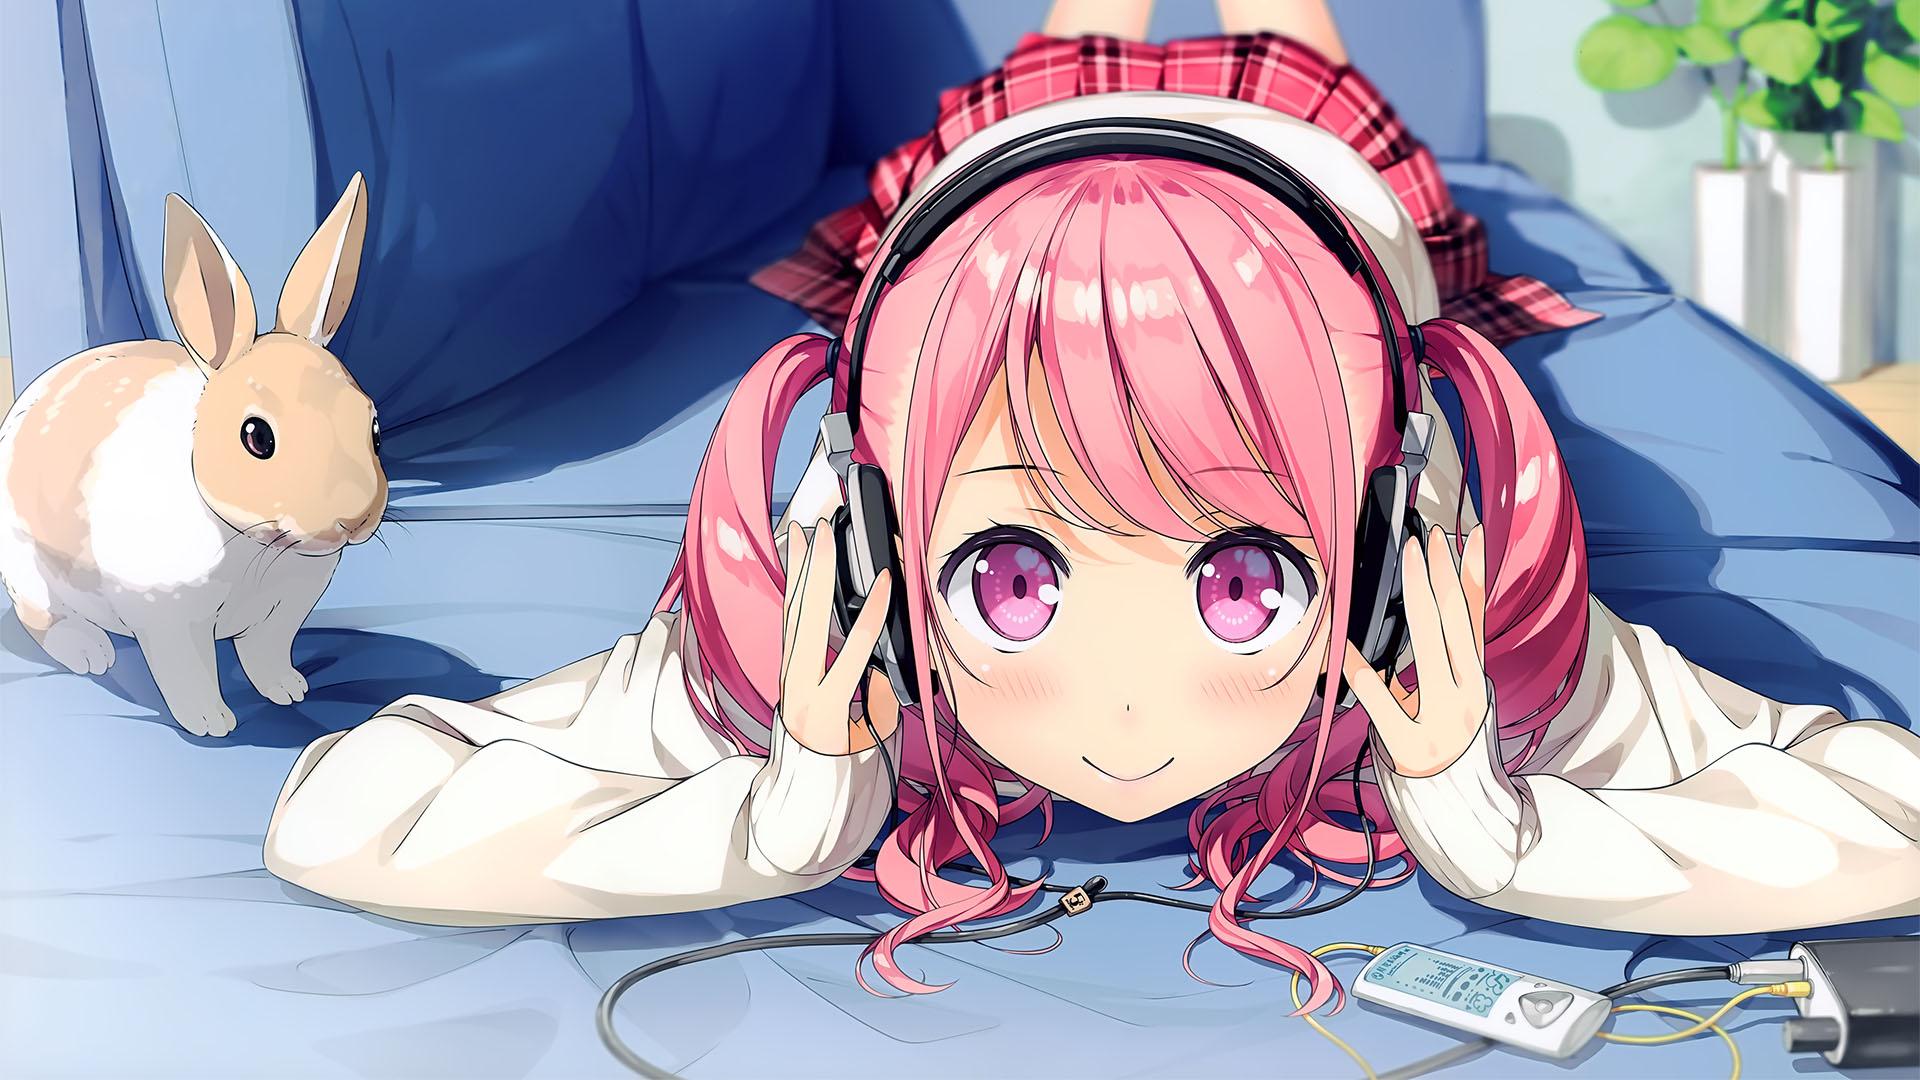 Cute Anime Girl With Headphones And A Bunny HD Wallpaper